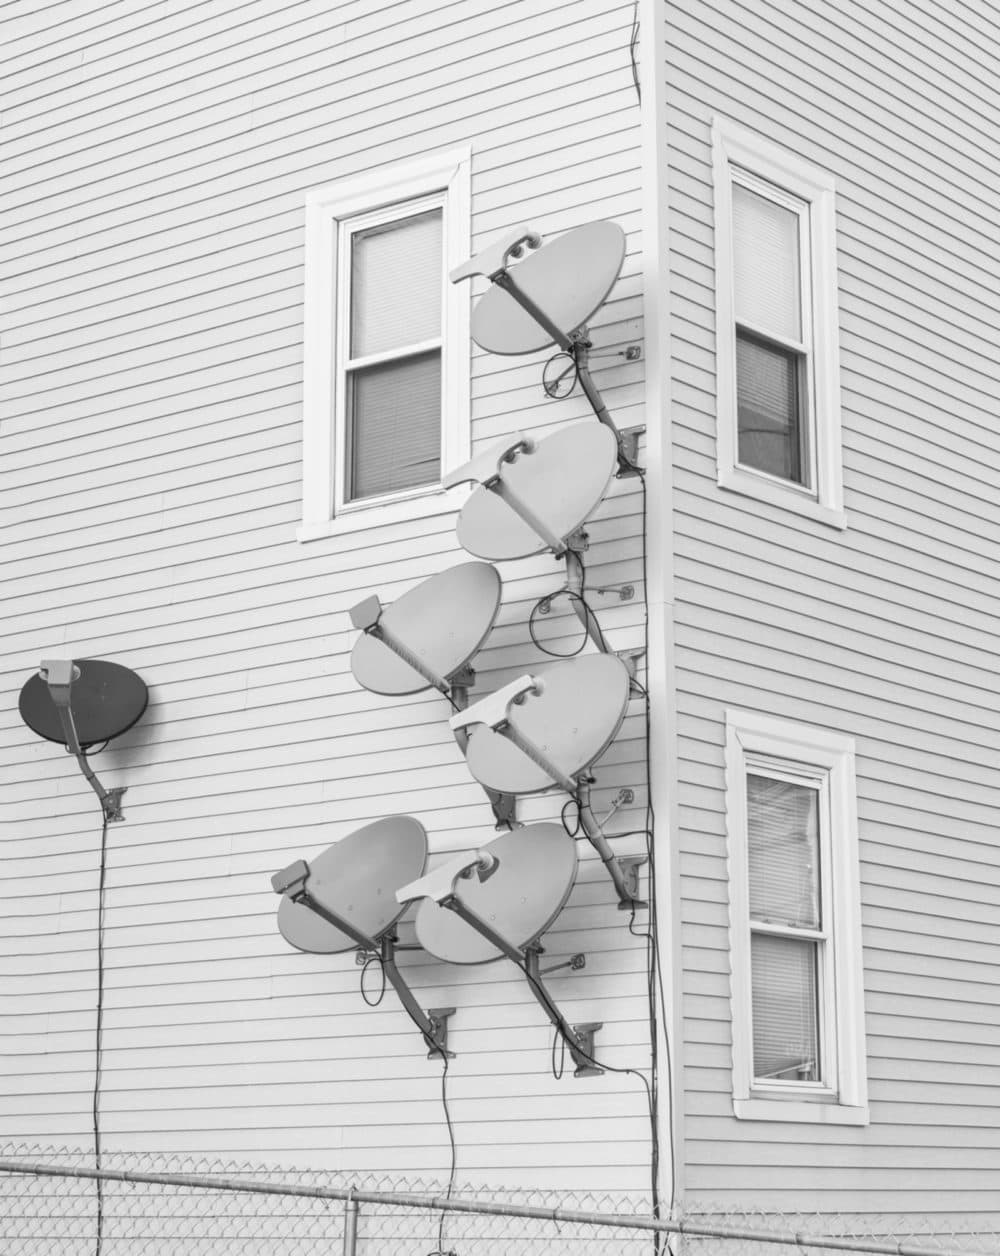 Evan Perkins, “Untitled (Satellite Dishes),” 2020, archival inkjet print. (Courtesy of the artist and Re-Direct Gallery)